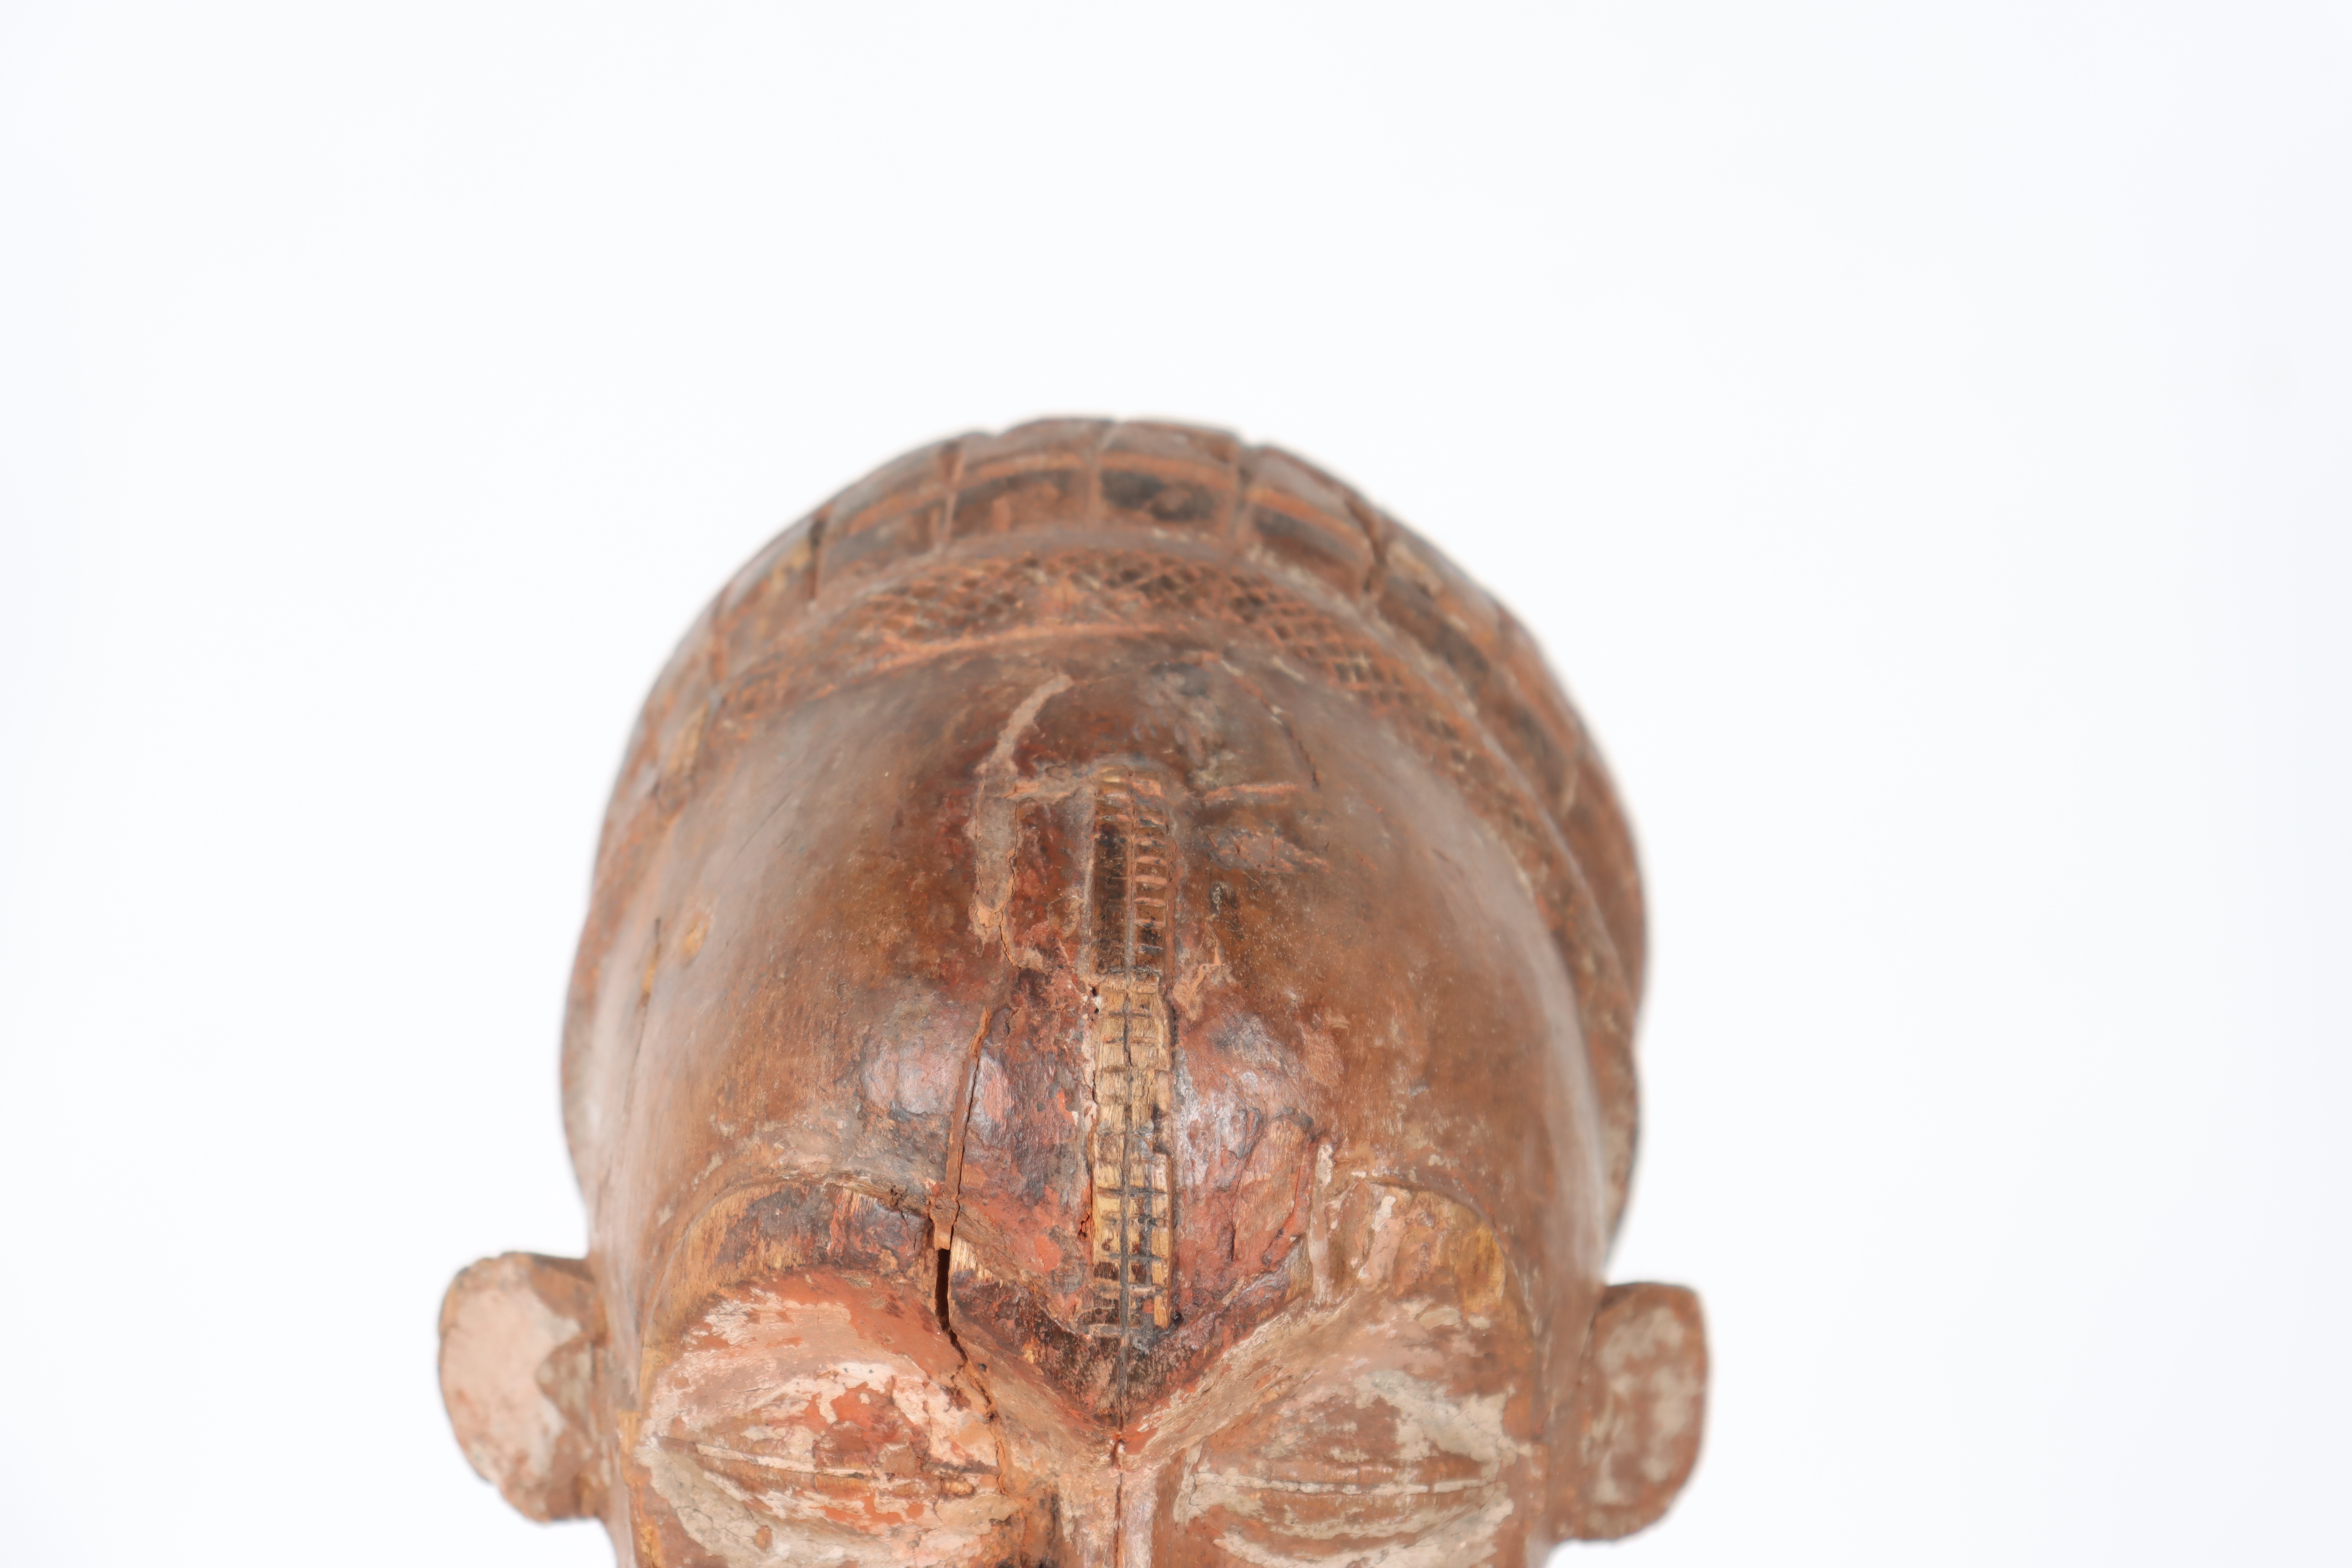 African Hand Carved Wooden Fertility Sculpture - Image 3 of 18